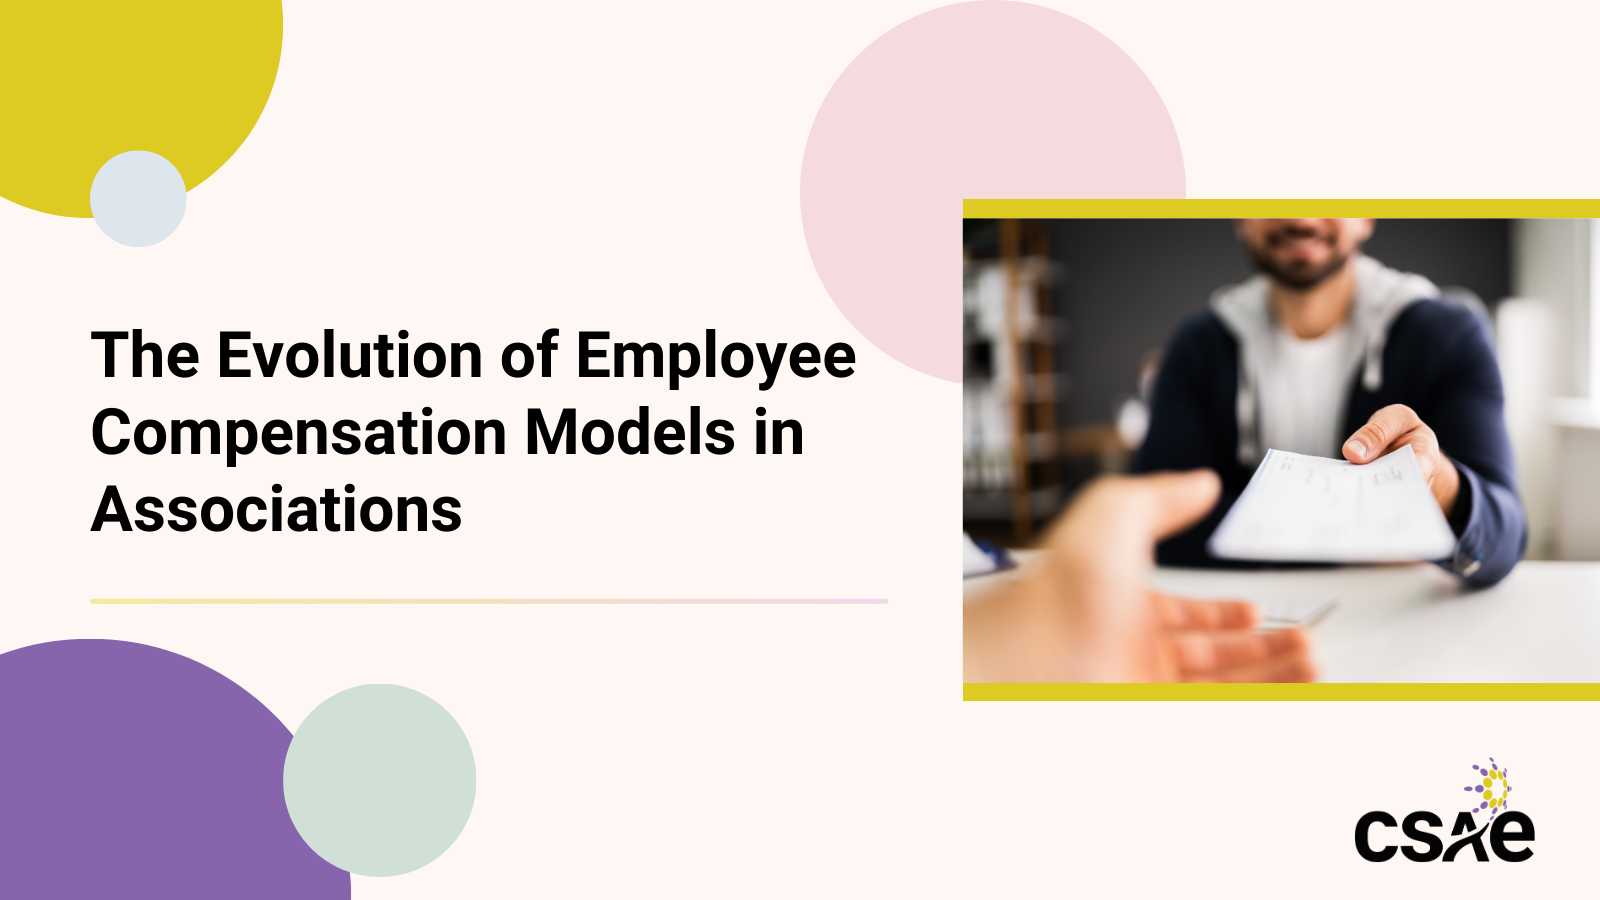 The Evolution of Employee Compensation Models in Associations